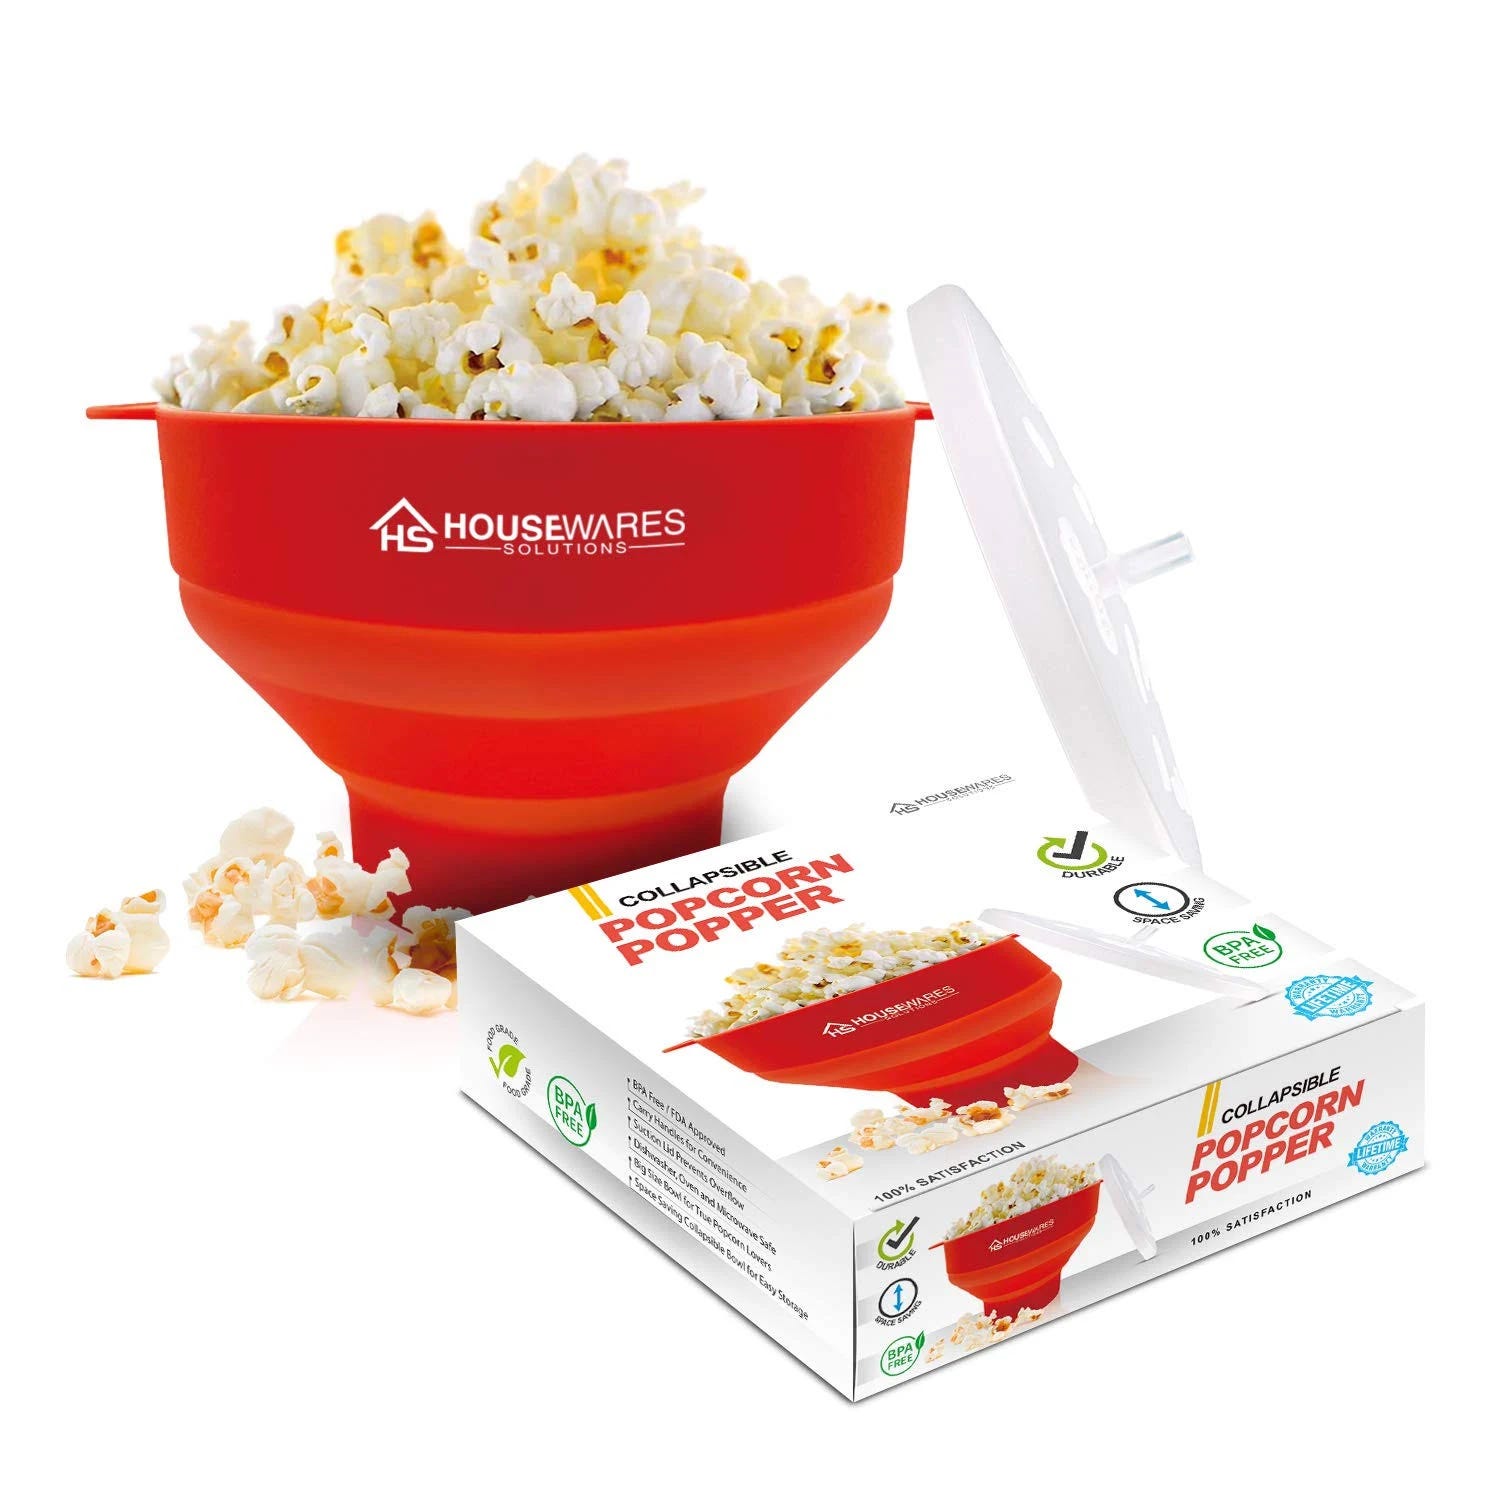 Microwave Popcorn Popper for Healthy Homemade Popcorn | Image